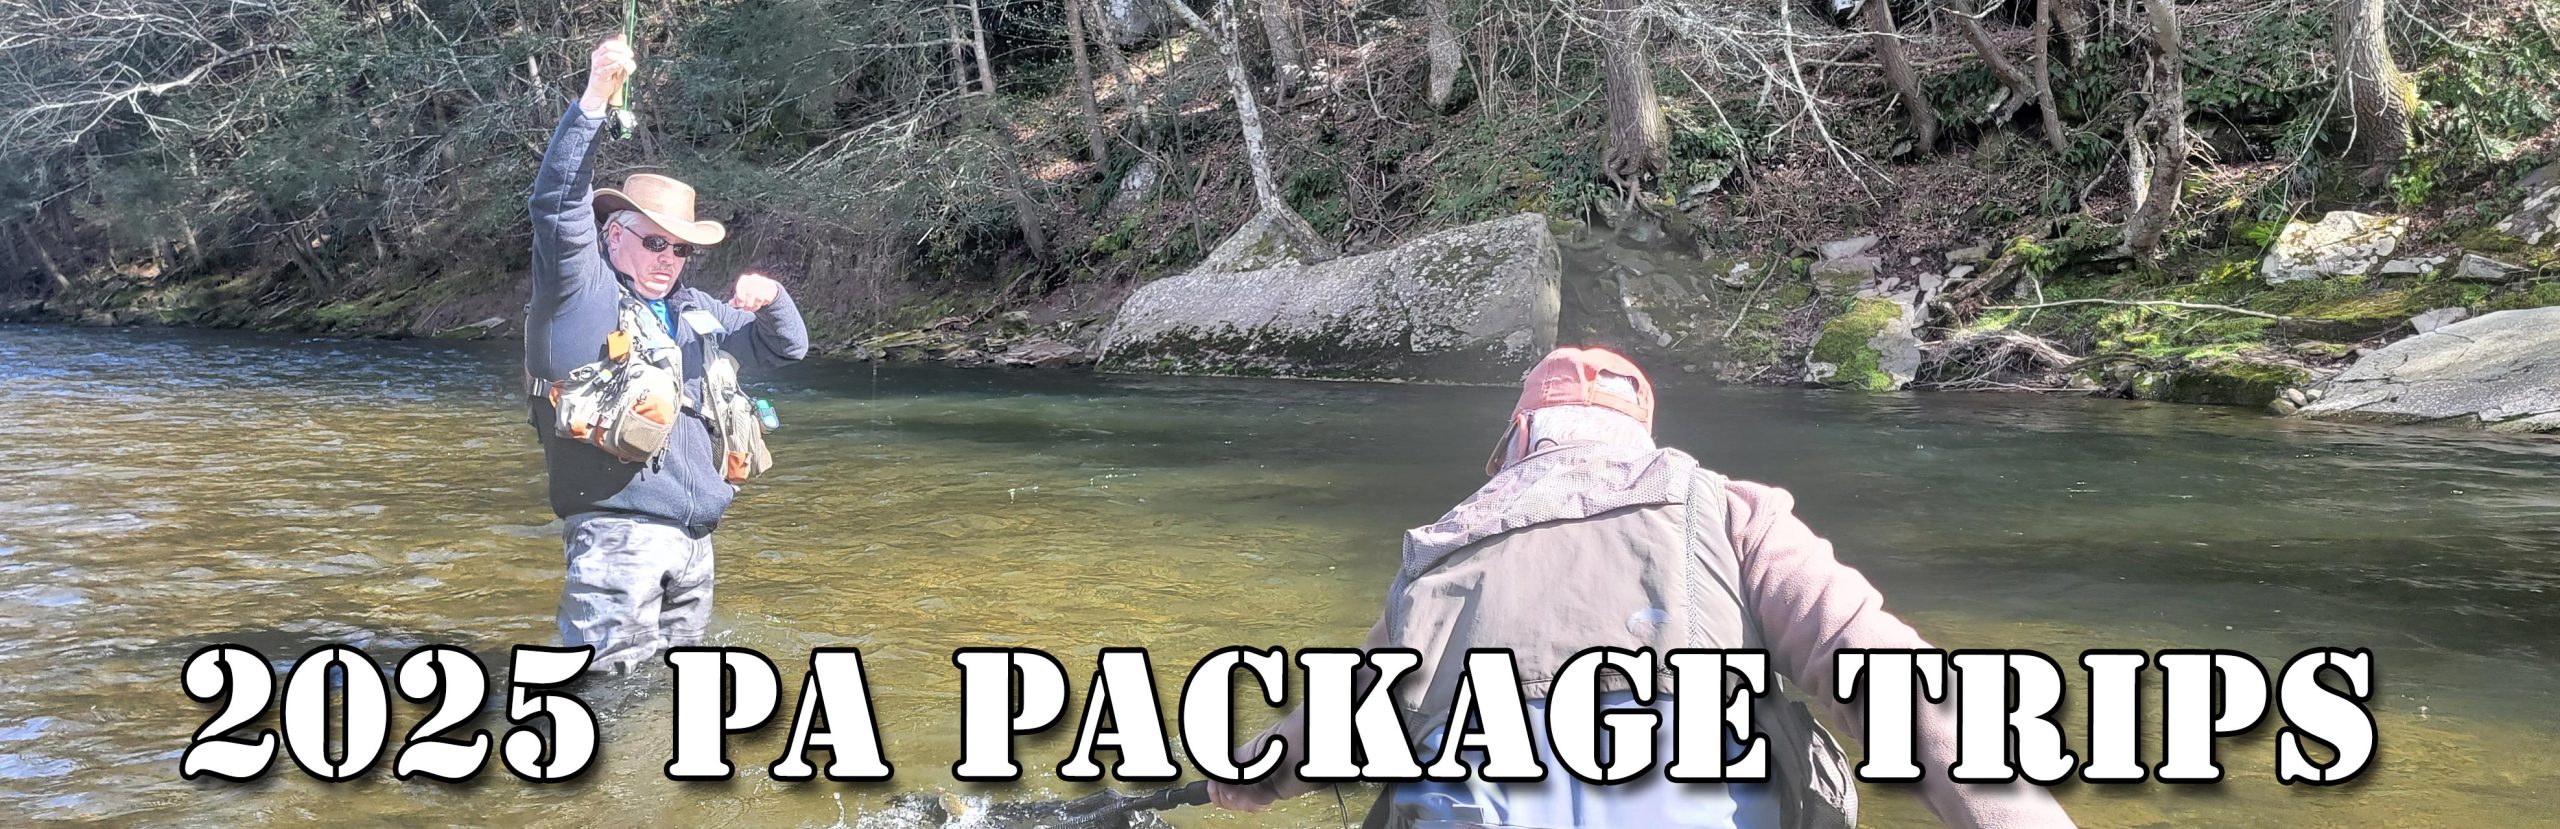 Our 2025 Pennsylvania Trout Fishing Package Trips (Lodging, Food, And Guiding) Are On the Website. Time To Book Before It Is Too Late.